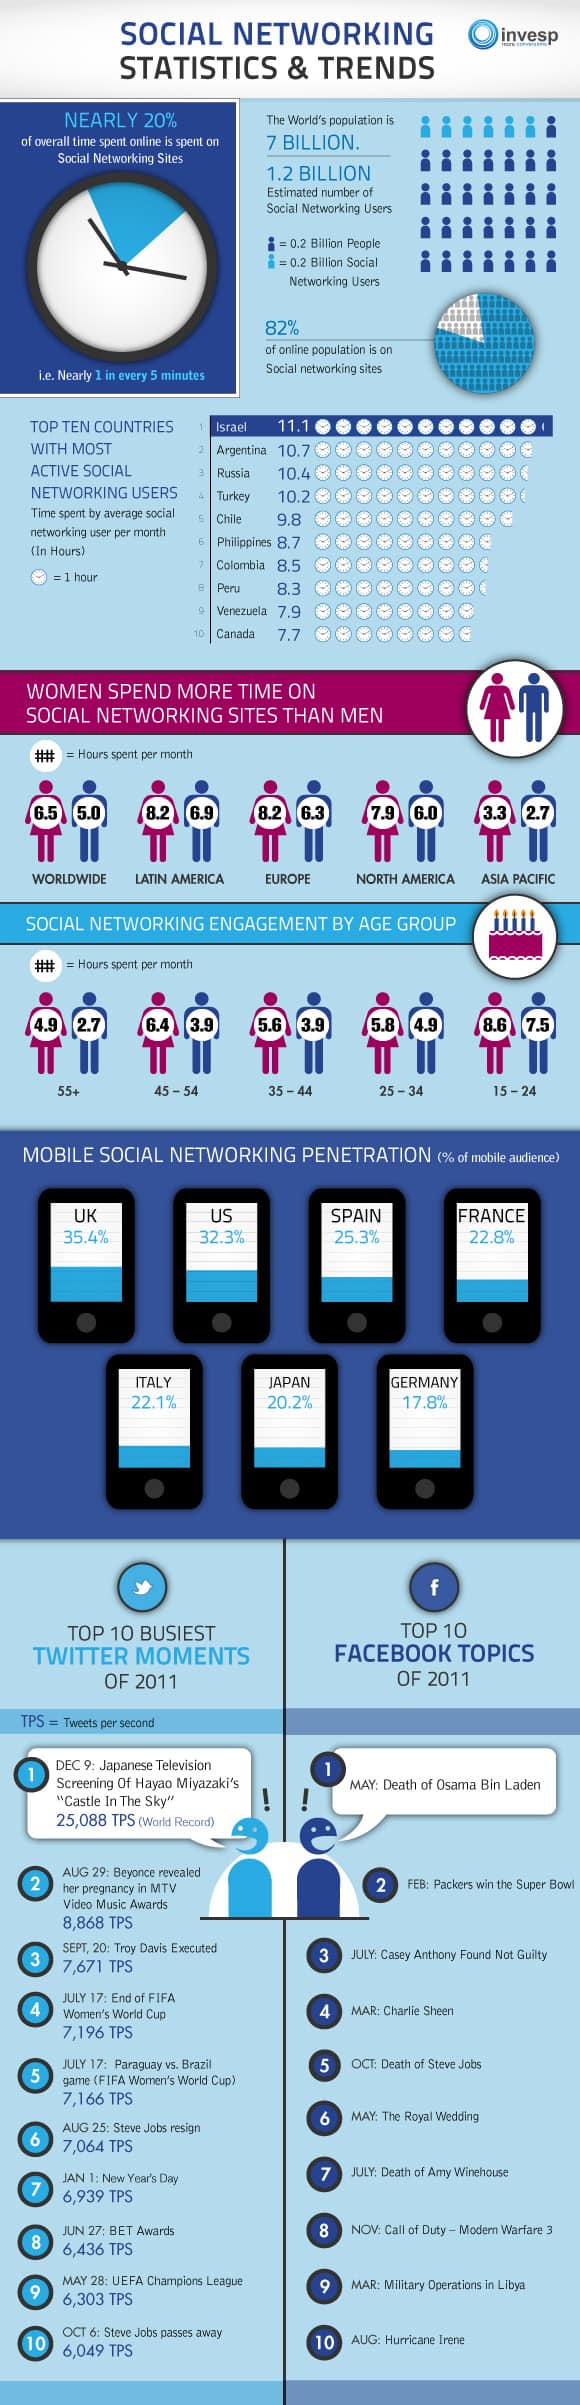 Social Networking Statistics & Trends infographic